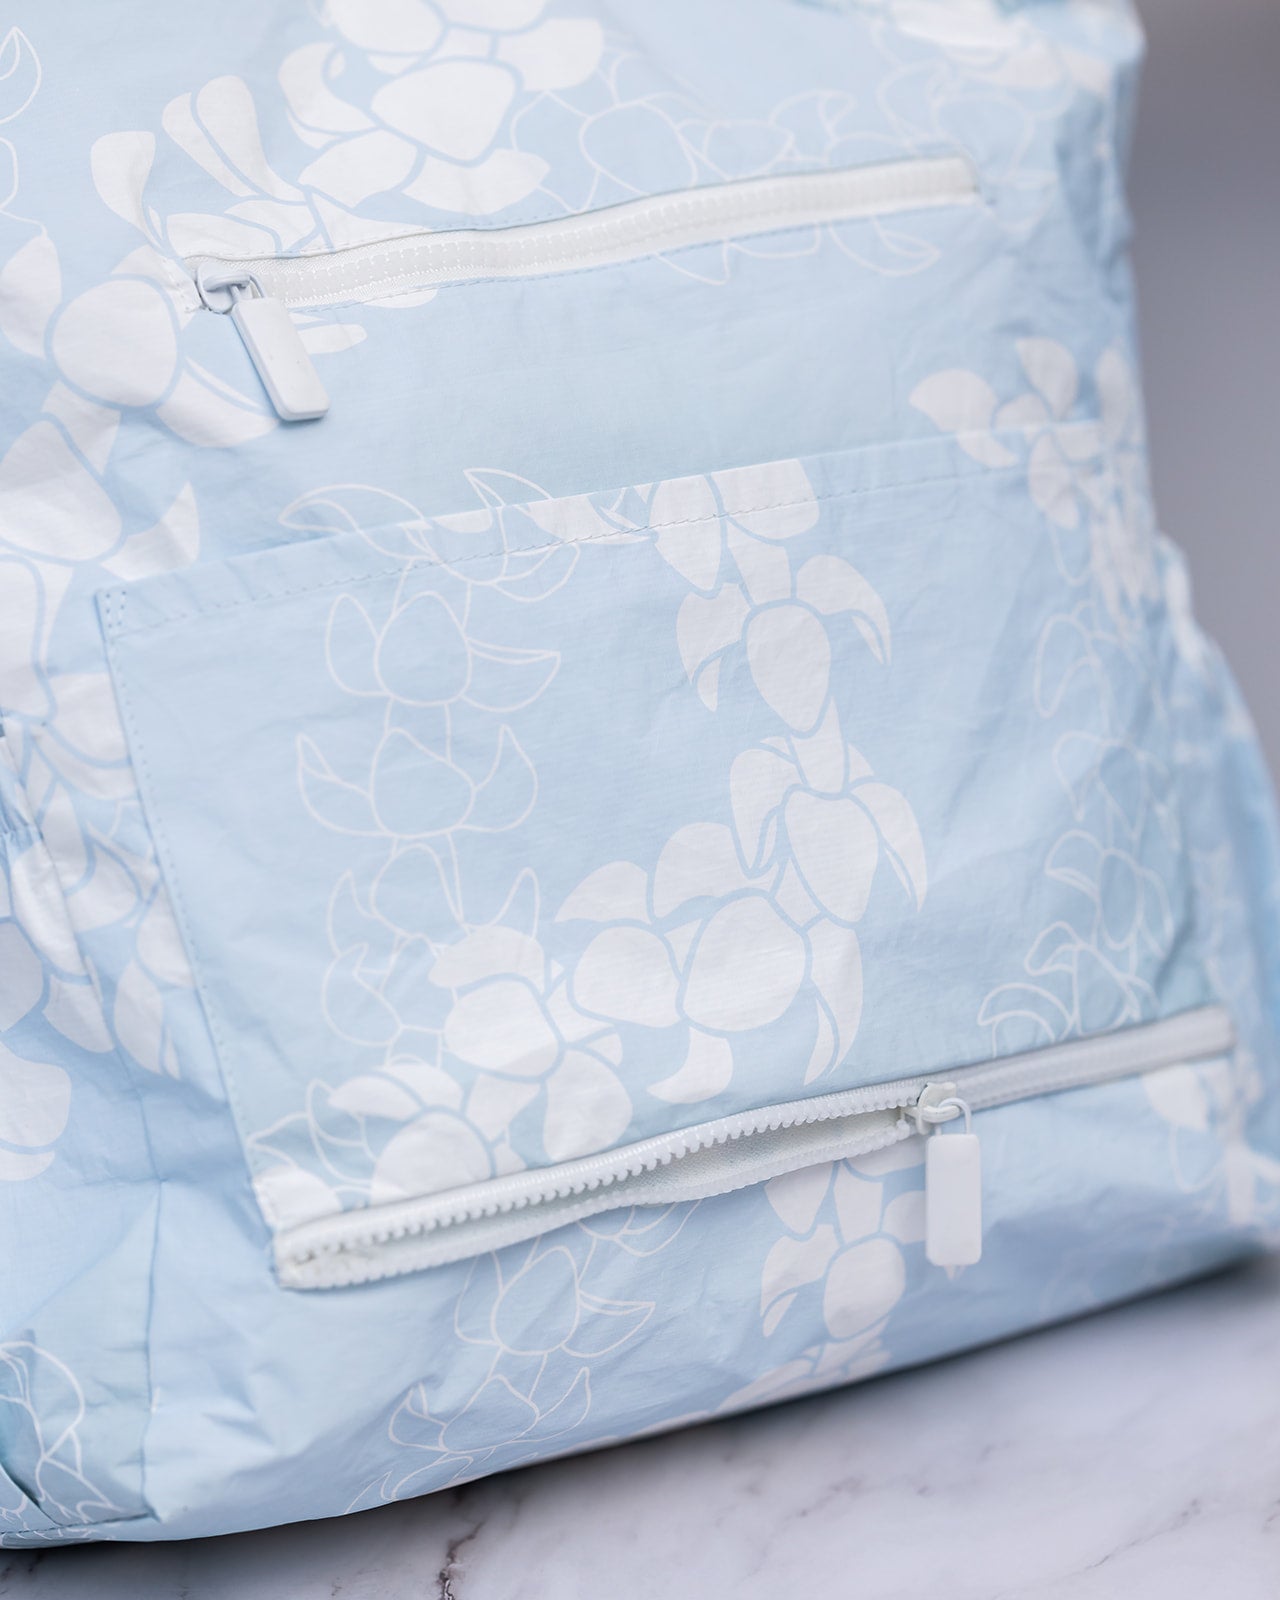 Close up of Puakenikeni tyvek tote bag showing a zippered pocket and an additional zippered luggage trolley sleeve.